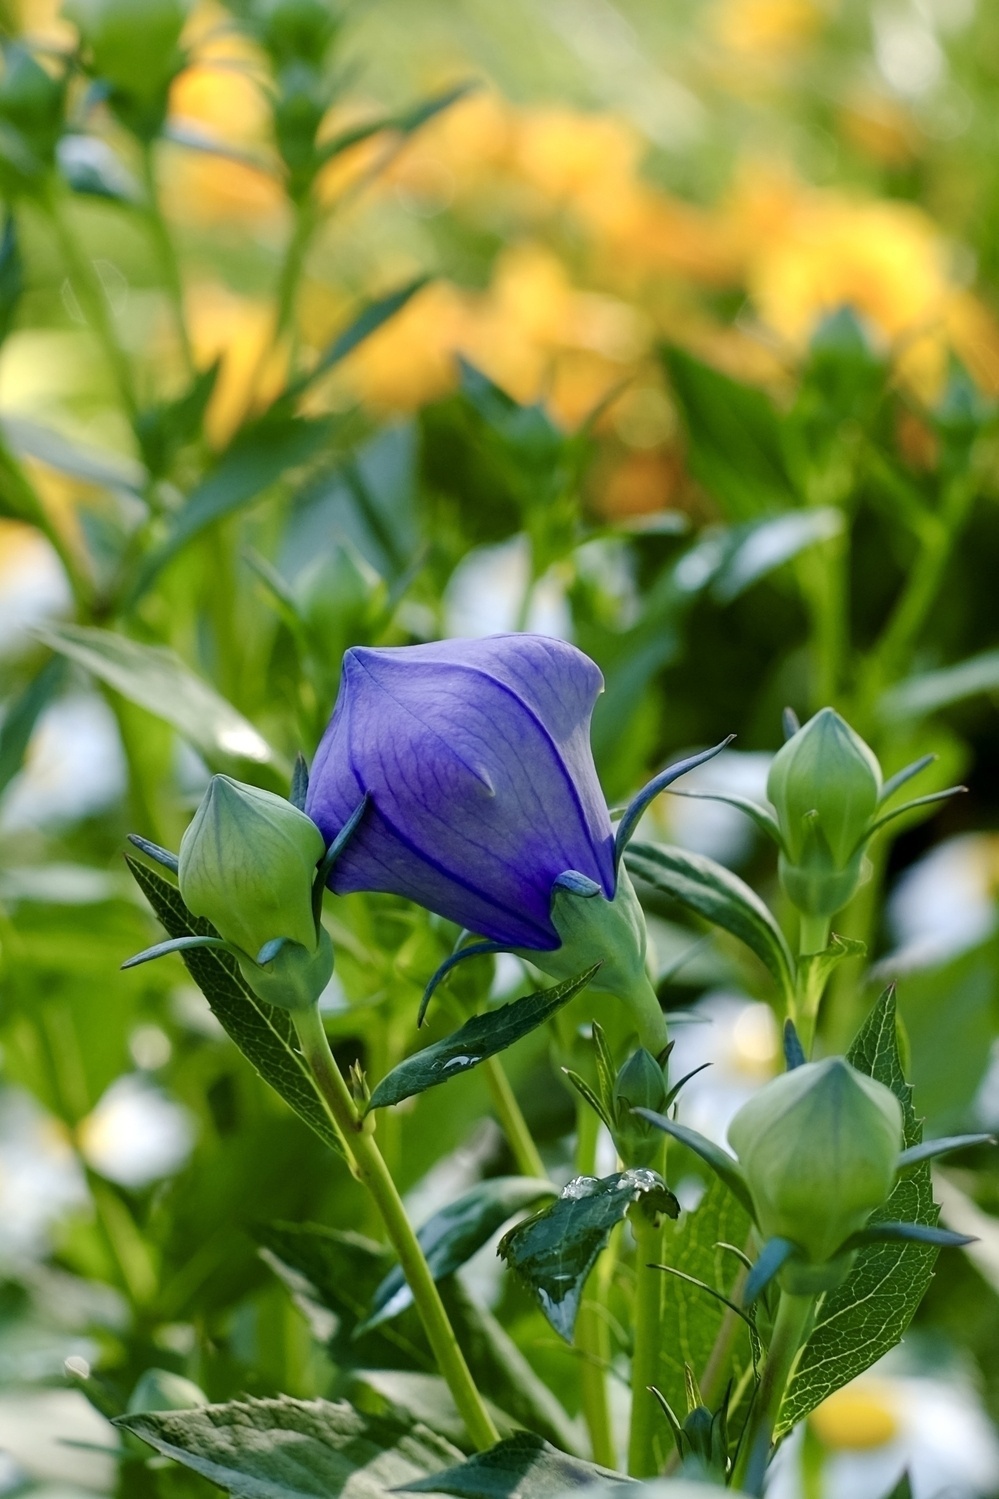 Blueish purple flower in front of green leaves with out of focus yellow flowers in the background